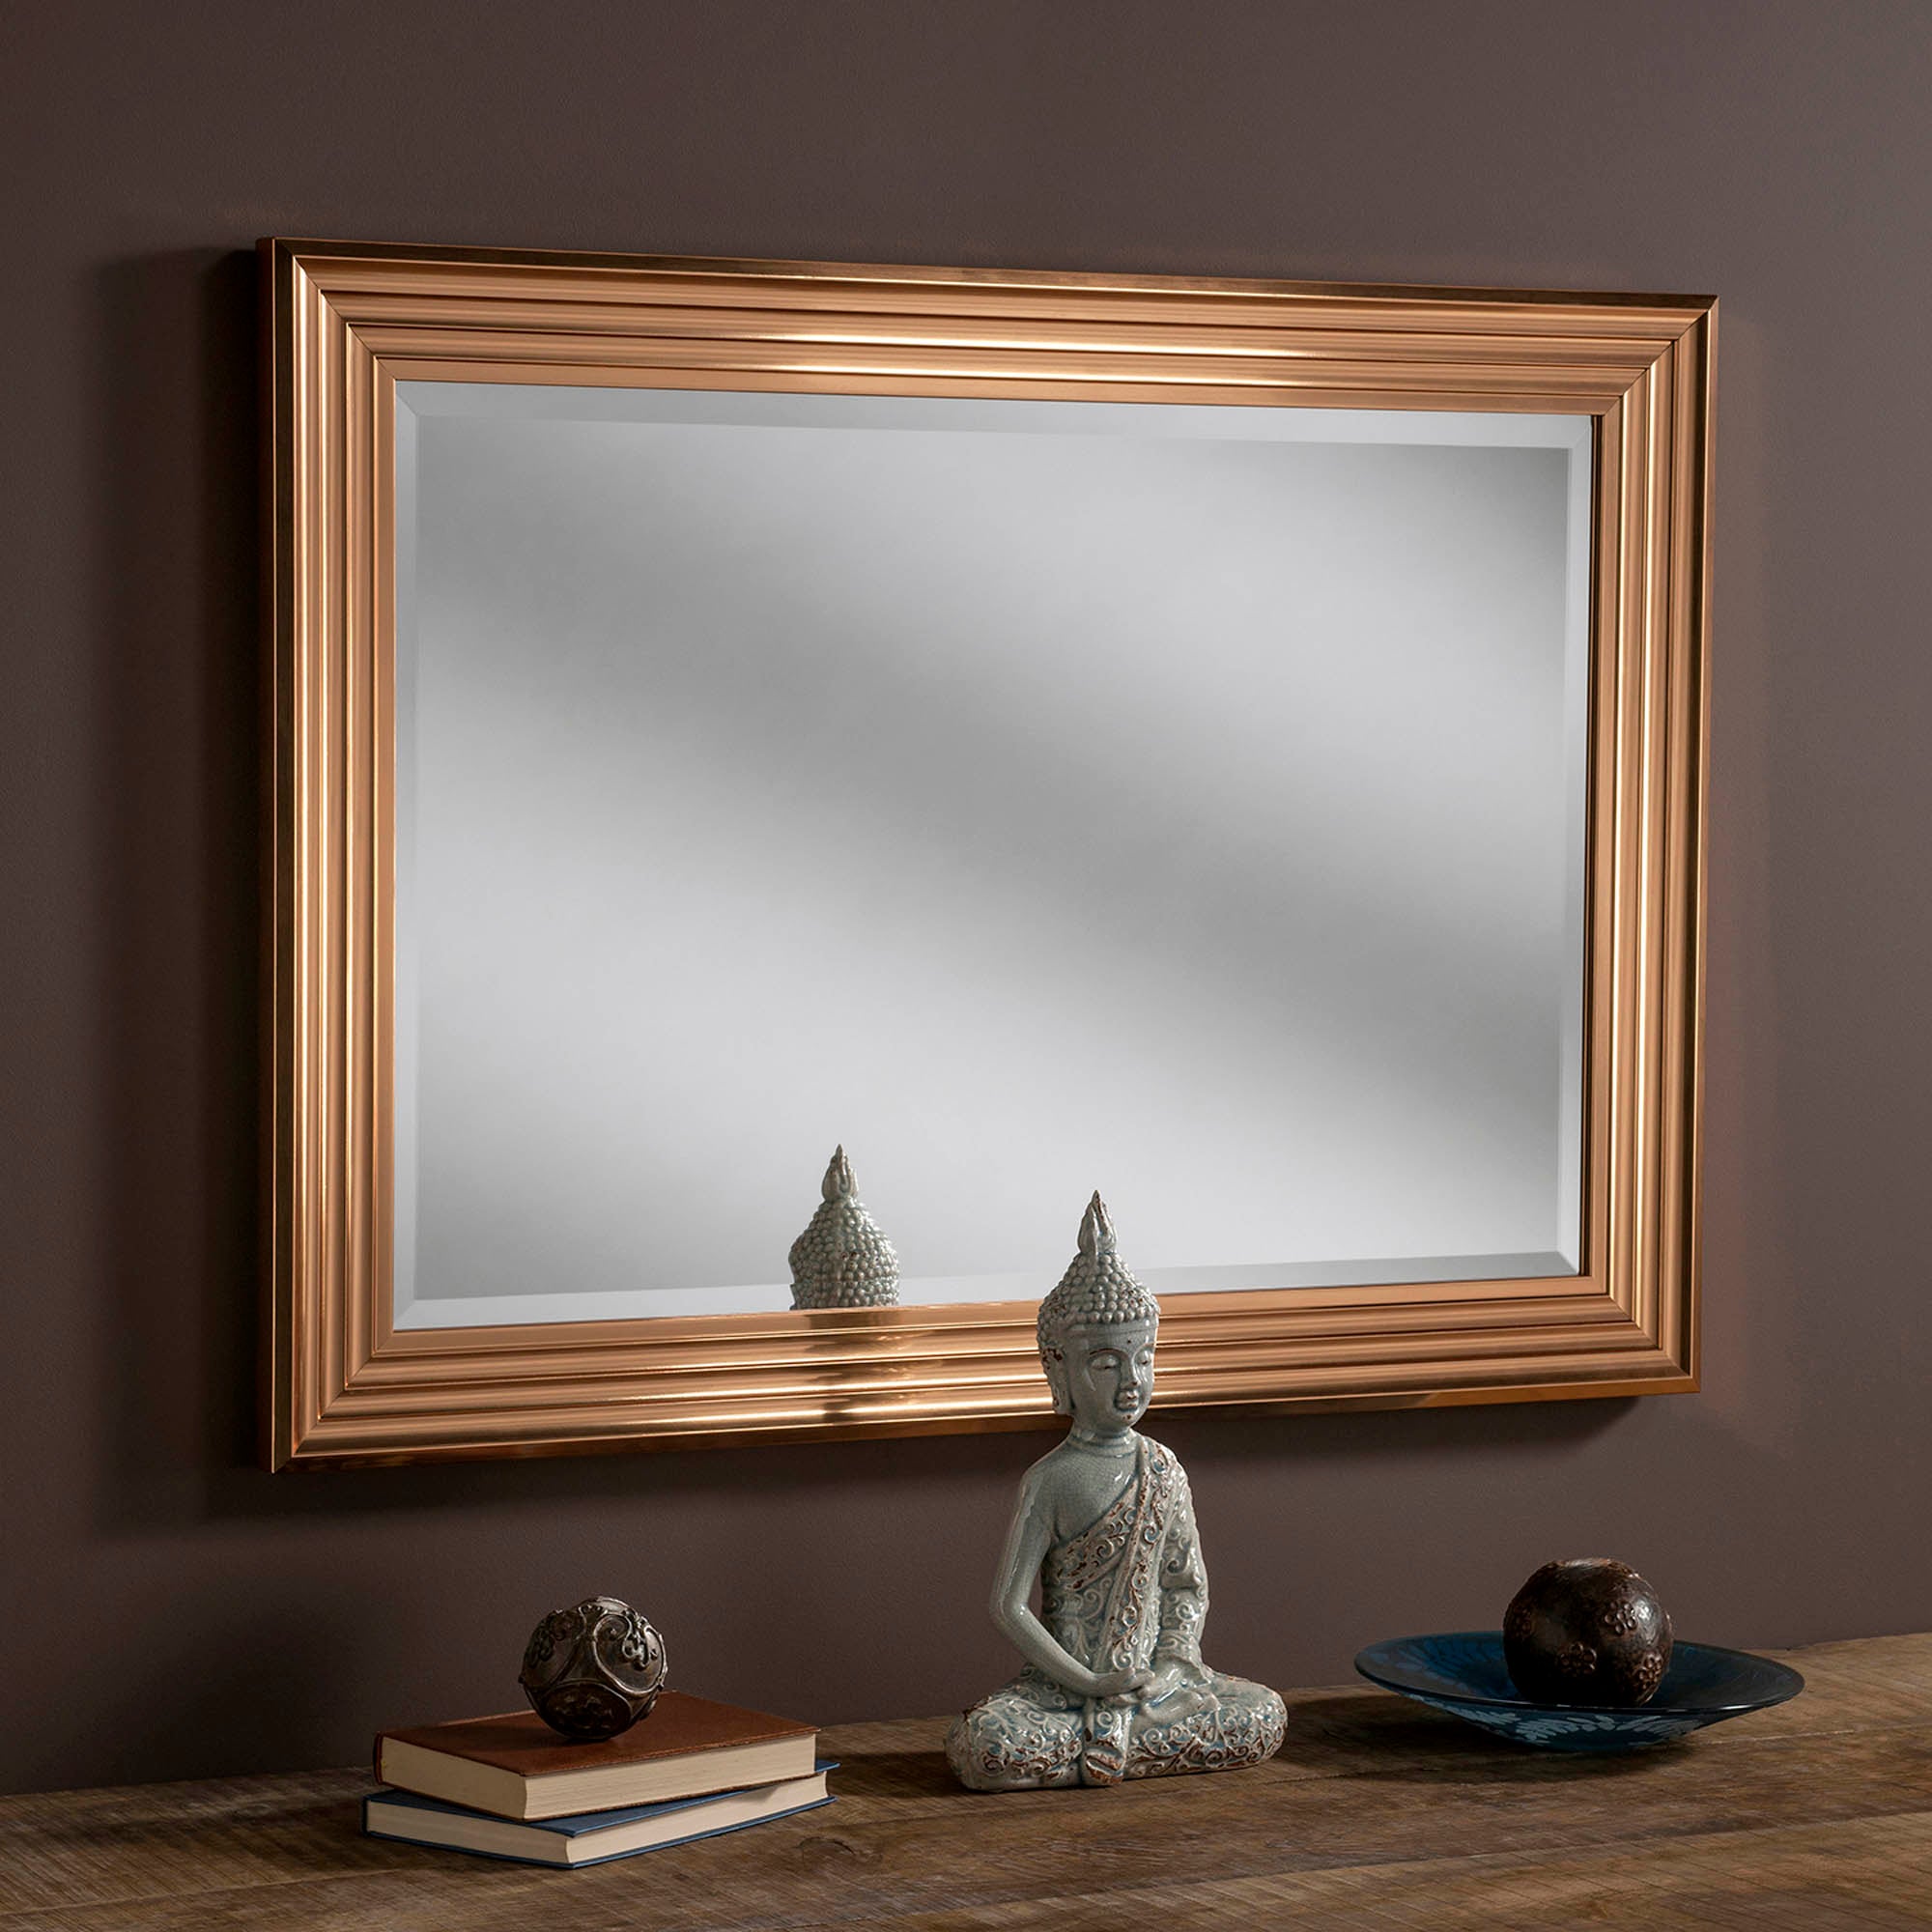 Yearn Framed Mirror Copper Gold Effect